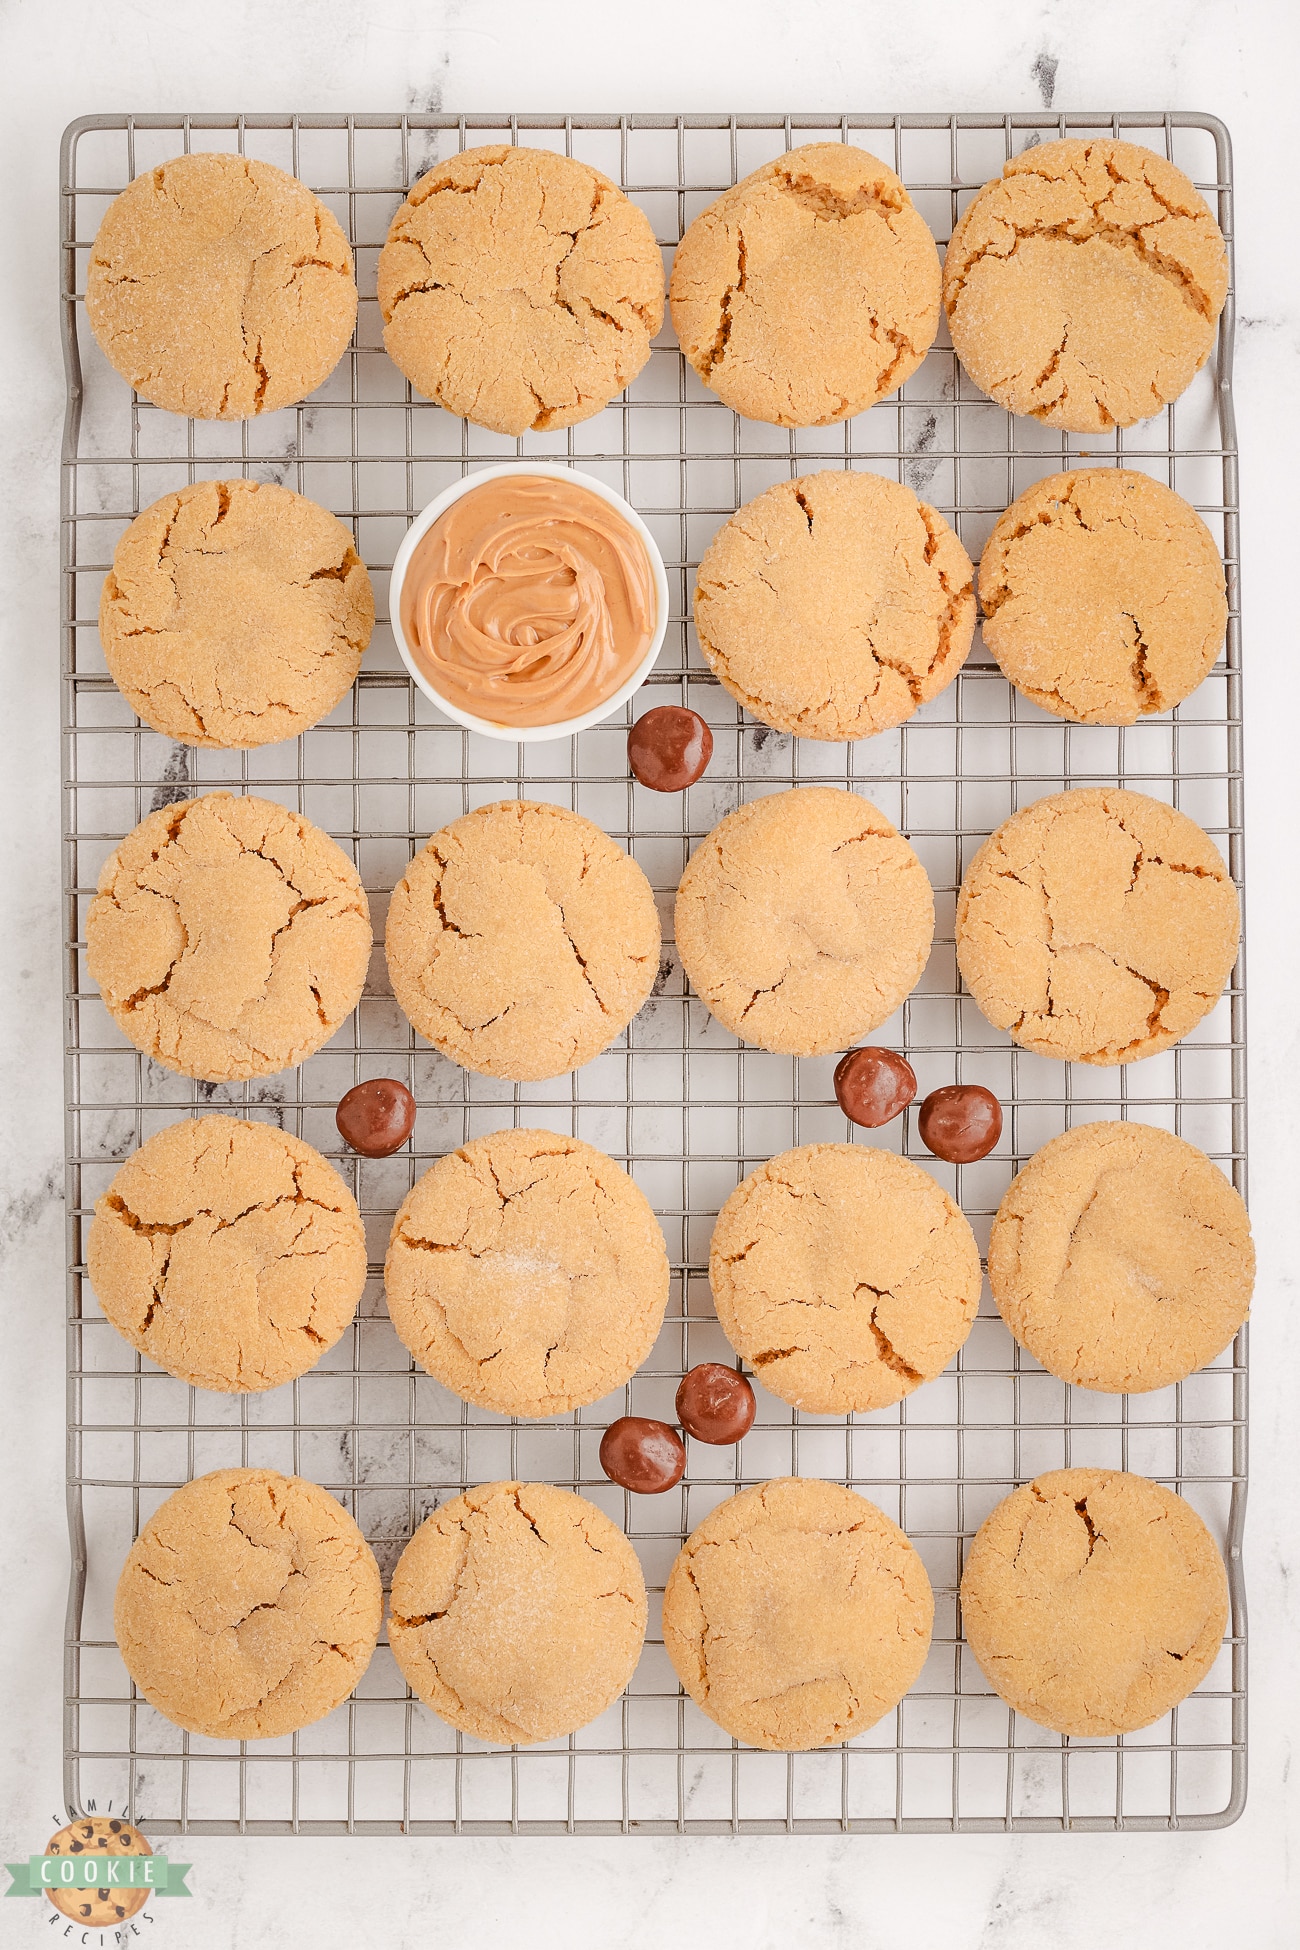 peanut butter surprise cookies stuffed with milk duds